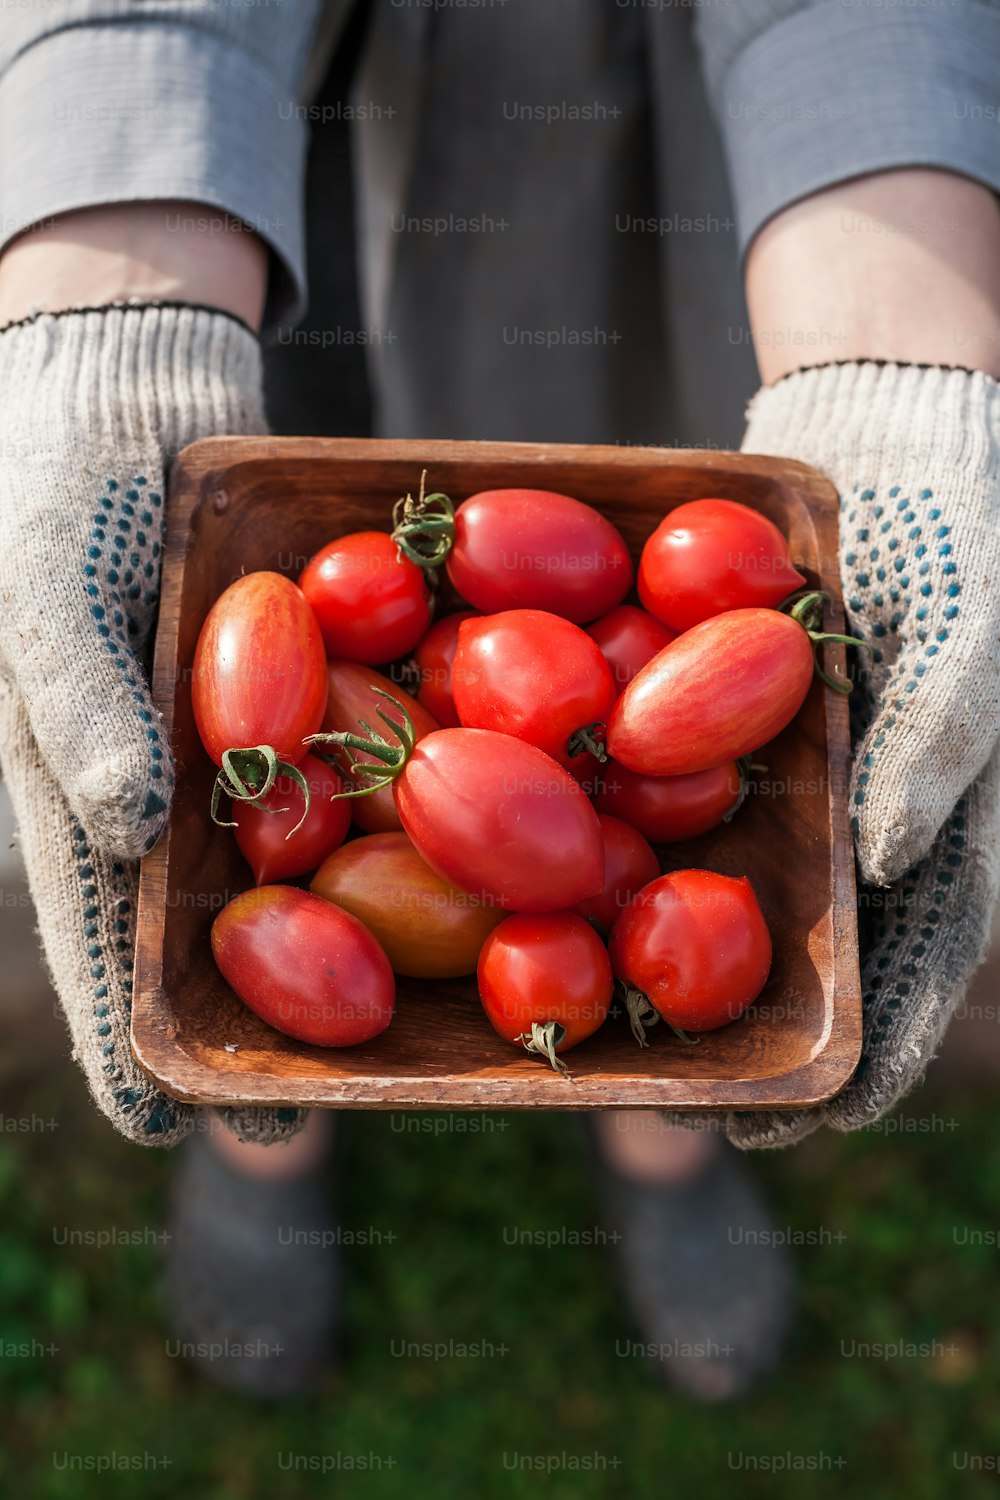 a person wearing gloves holding a wooden bowl of tomatoes